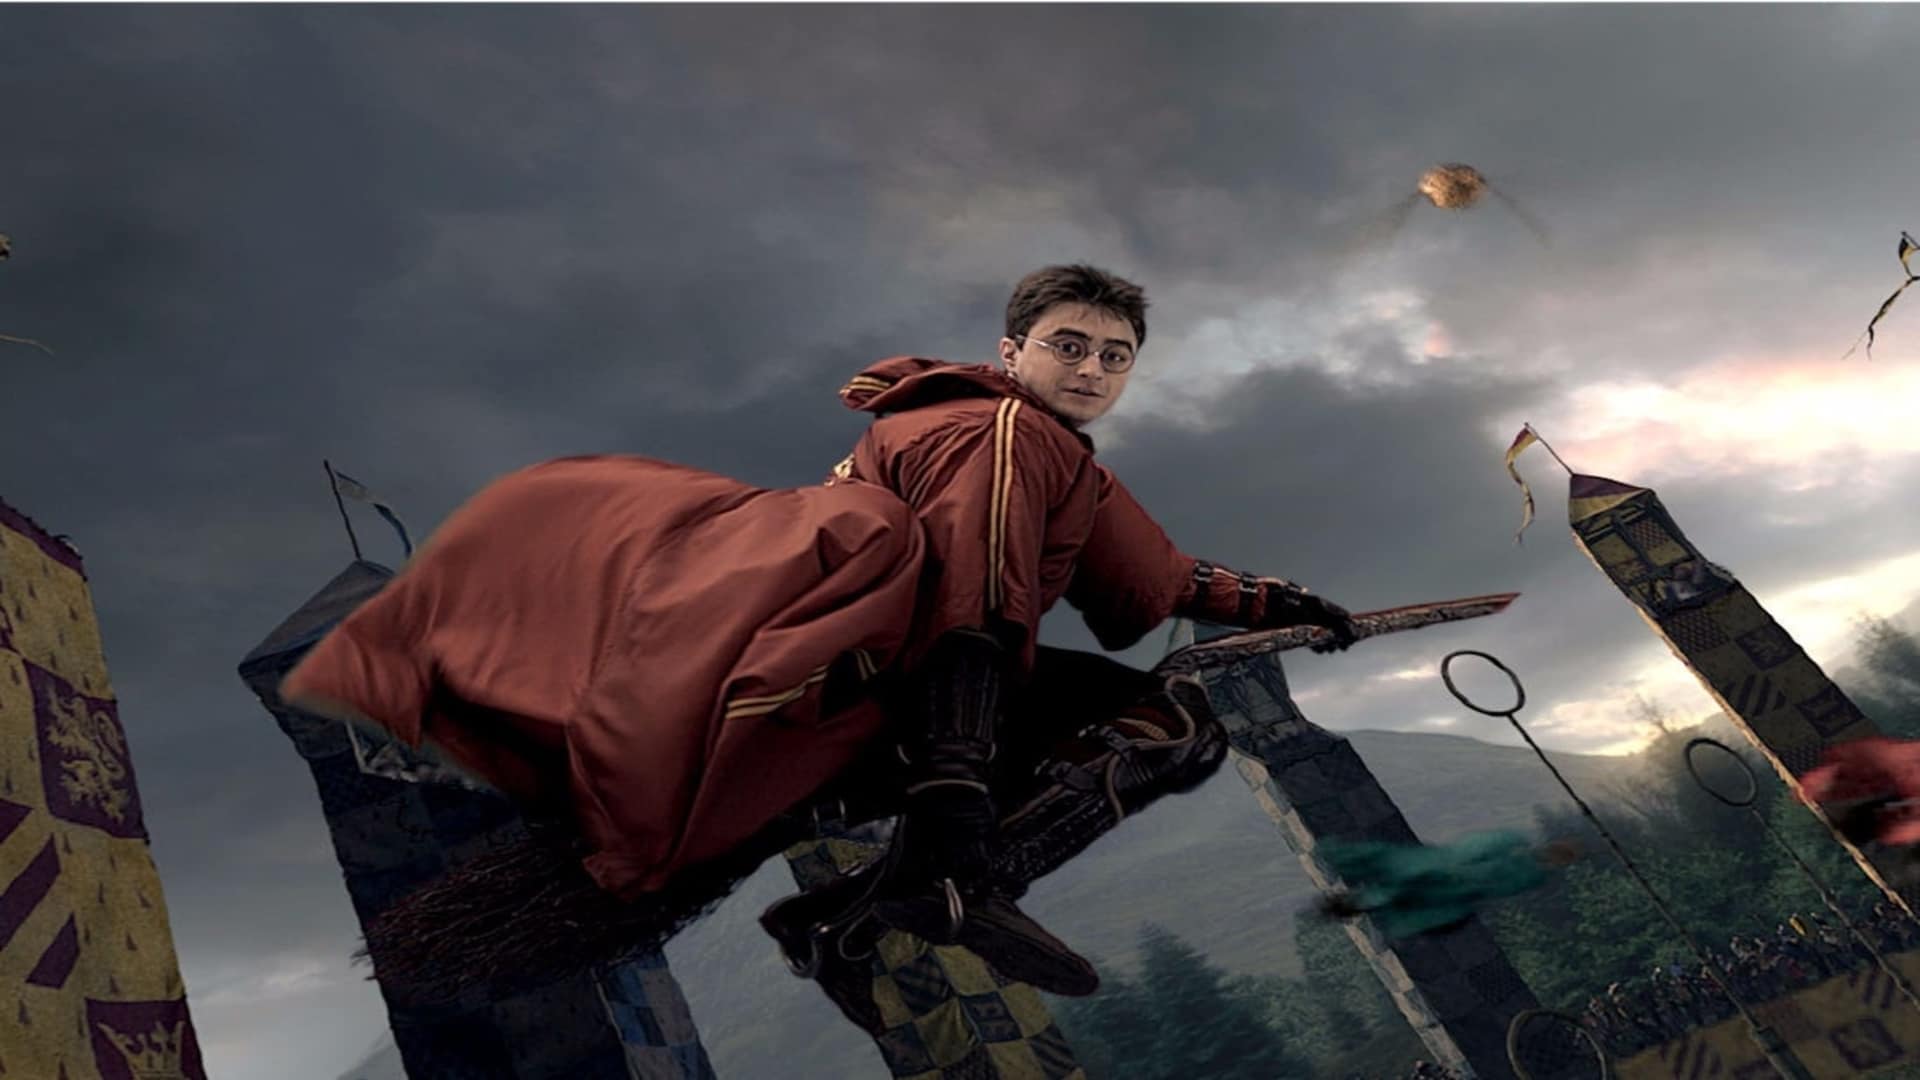 The fighter Harry in Quidditch